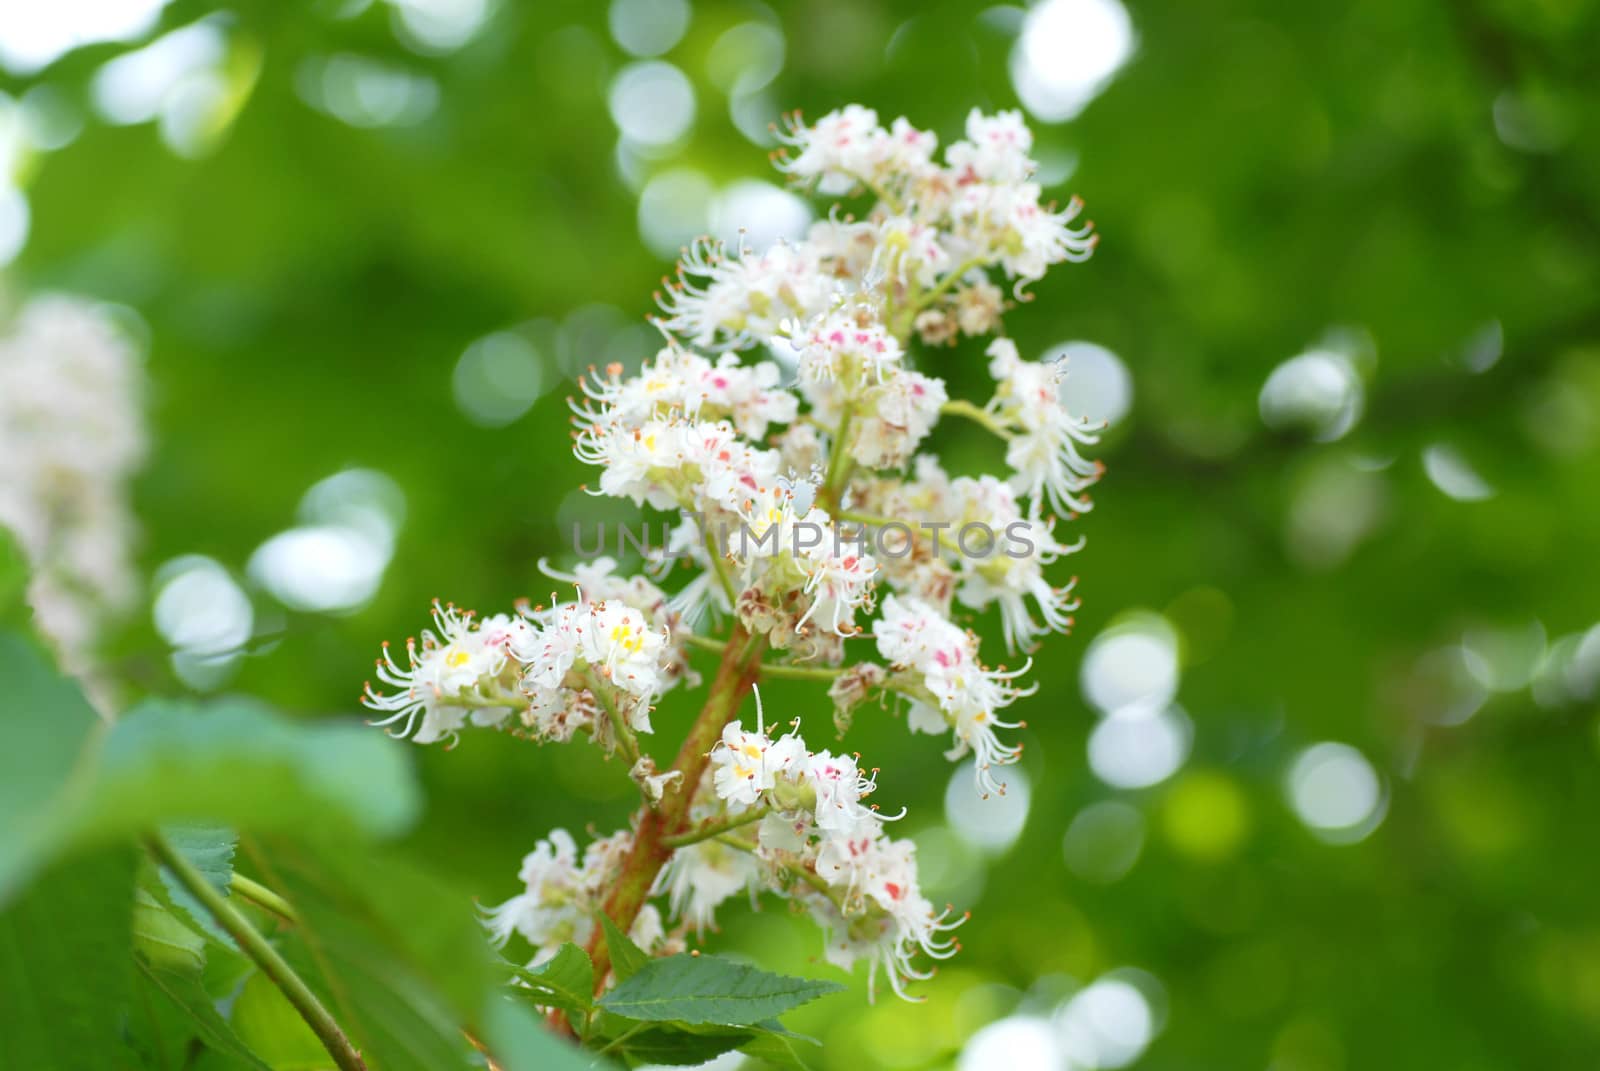 blooming chestnut flowers on a tree branch